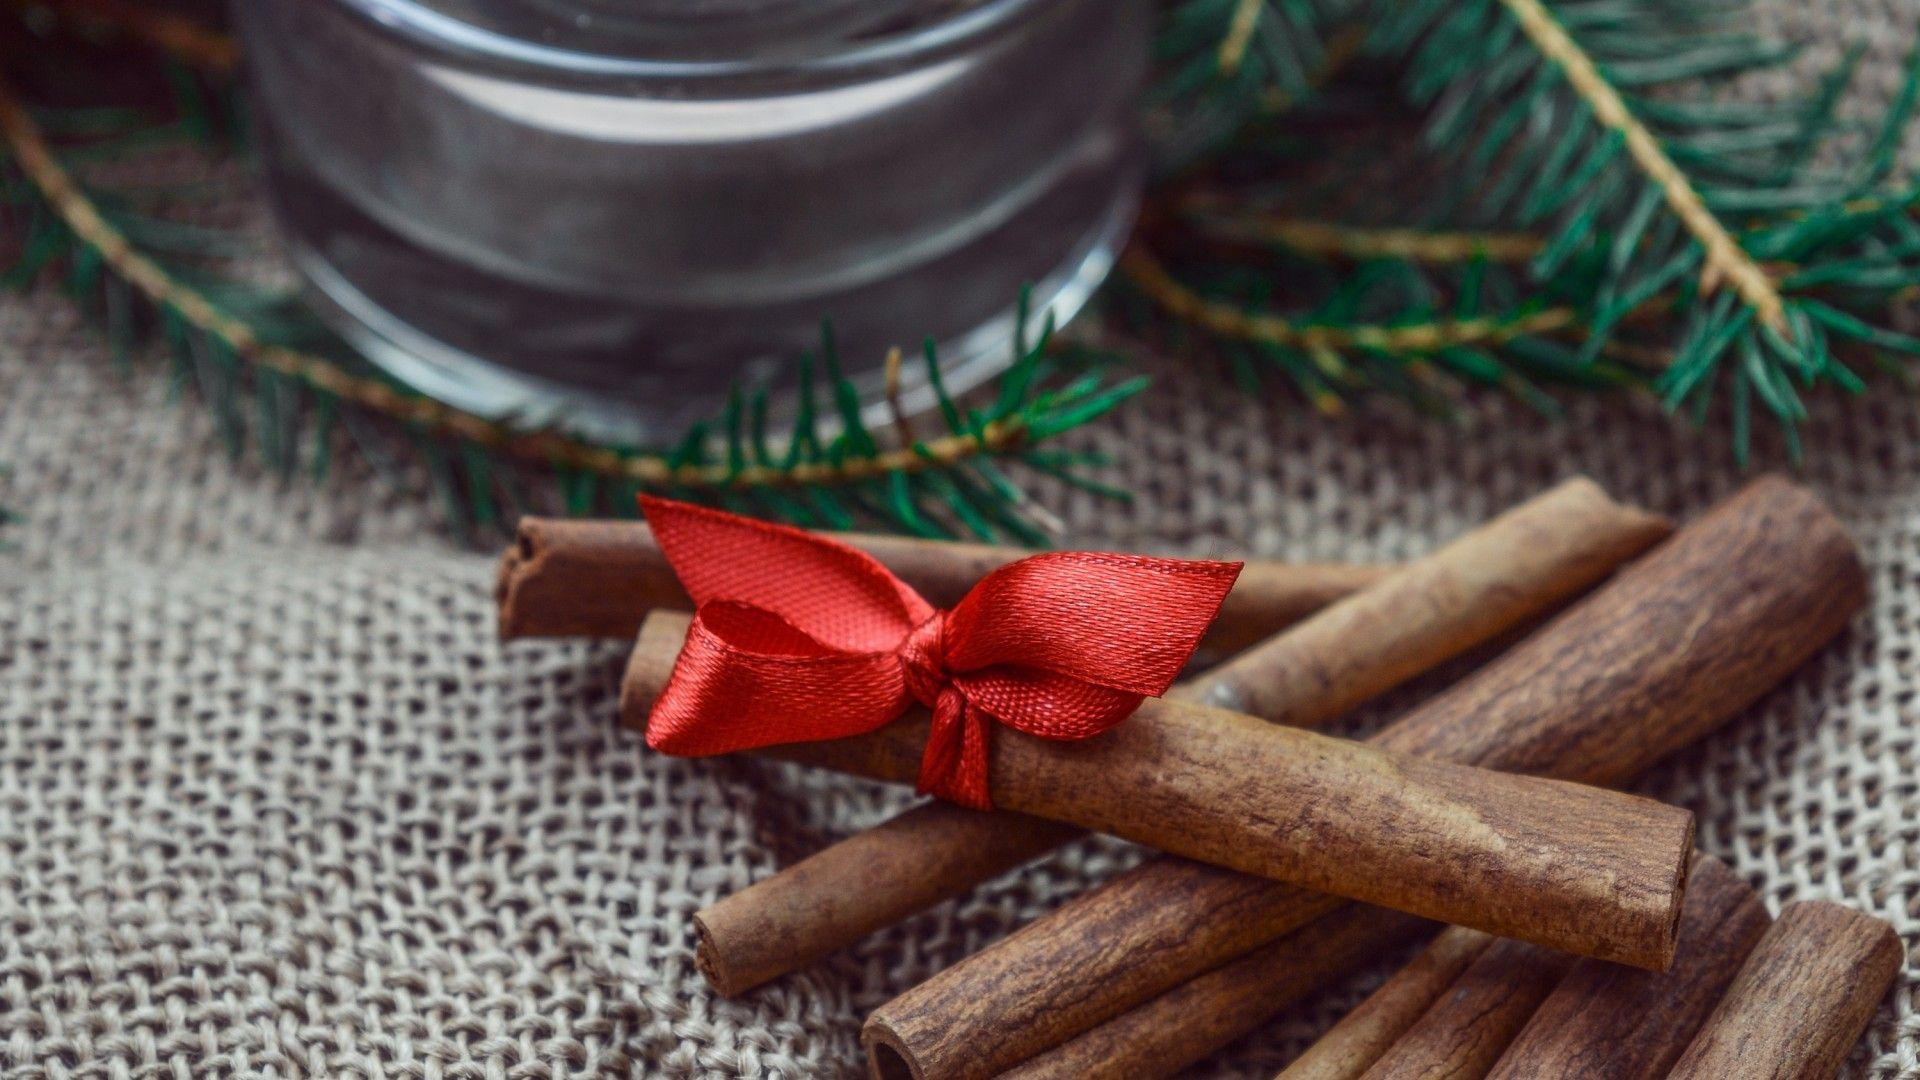 Download 1920x1080 Cinnamon, Christmas, Candle, New Year 2018